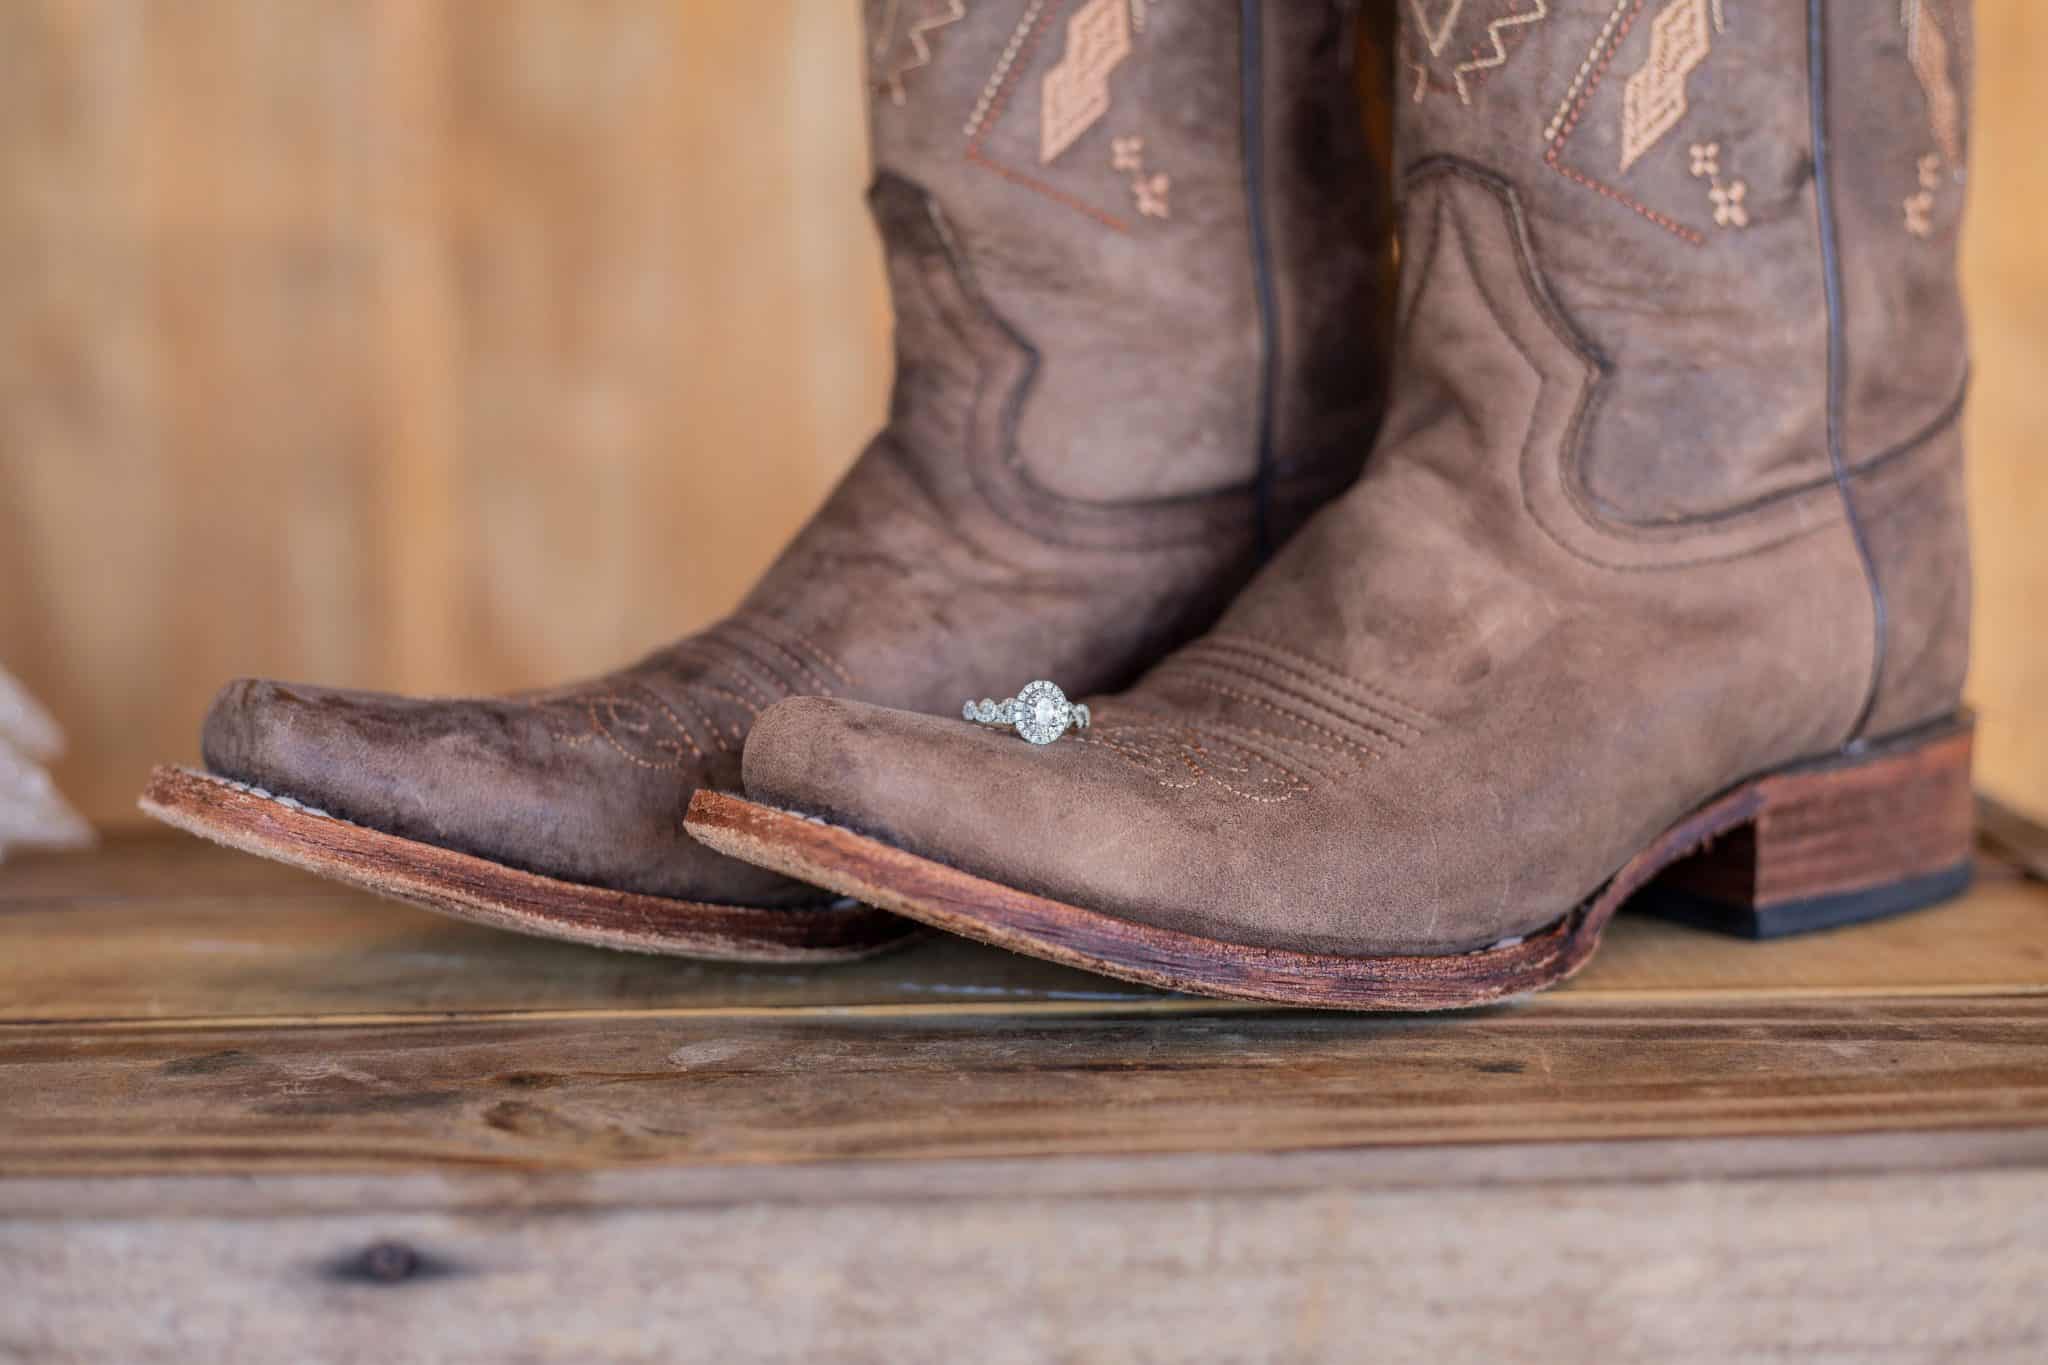 Cowboy boots with diamond rind sitting on top